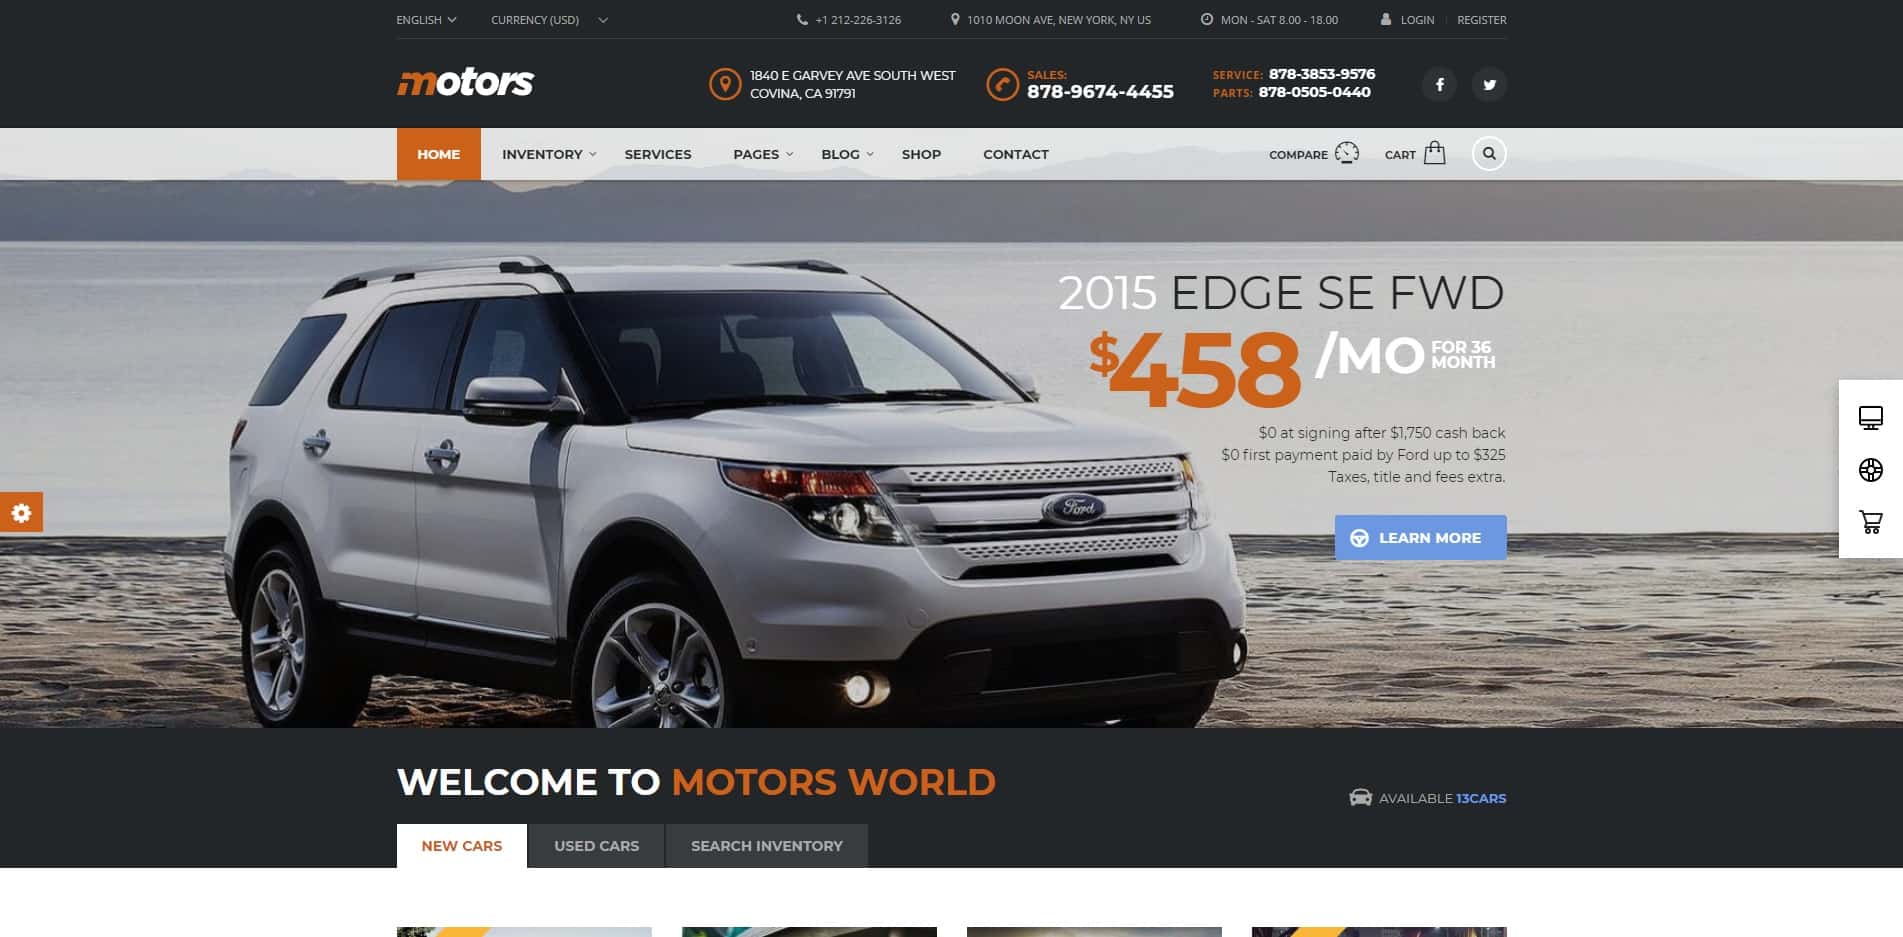 25-car-dealer-website-templates-and-wordpress-themes-for-car-dealers